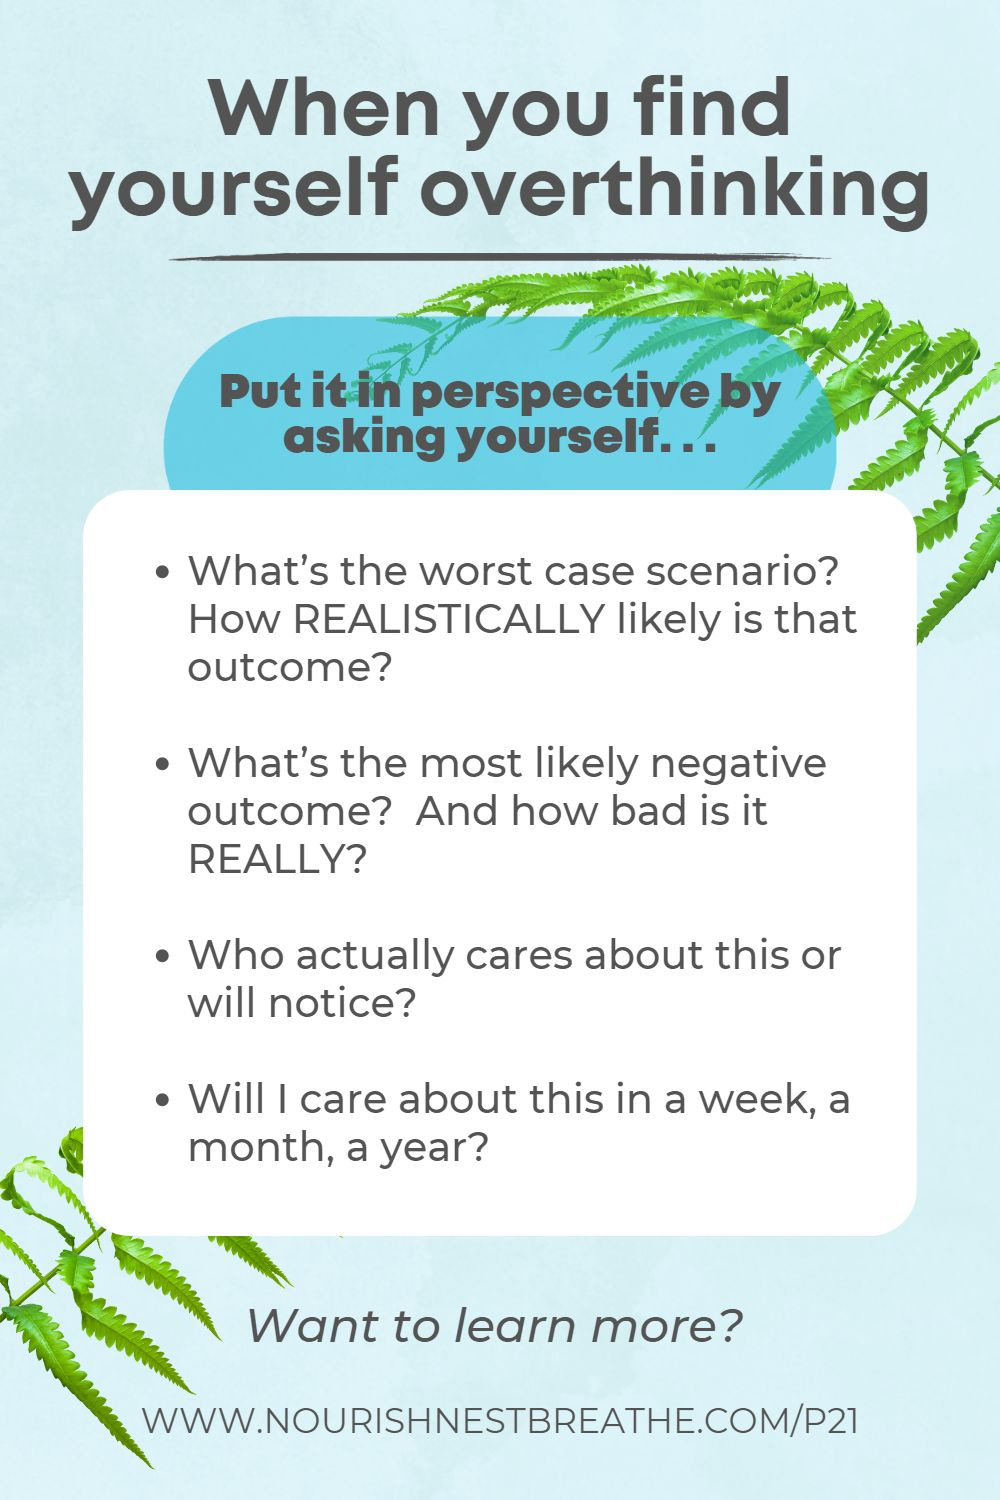 When you find yourself overthinking, put it in perspective by asking yourself. . . What's the worst case scenario? How realistically likely is that outcome? What's the most likely negative outcome? And how bad is it really? Who actually cares about this or will notice? Will I care about this in a week, a month, a year?